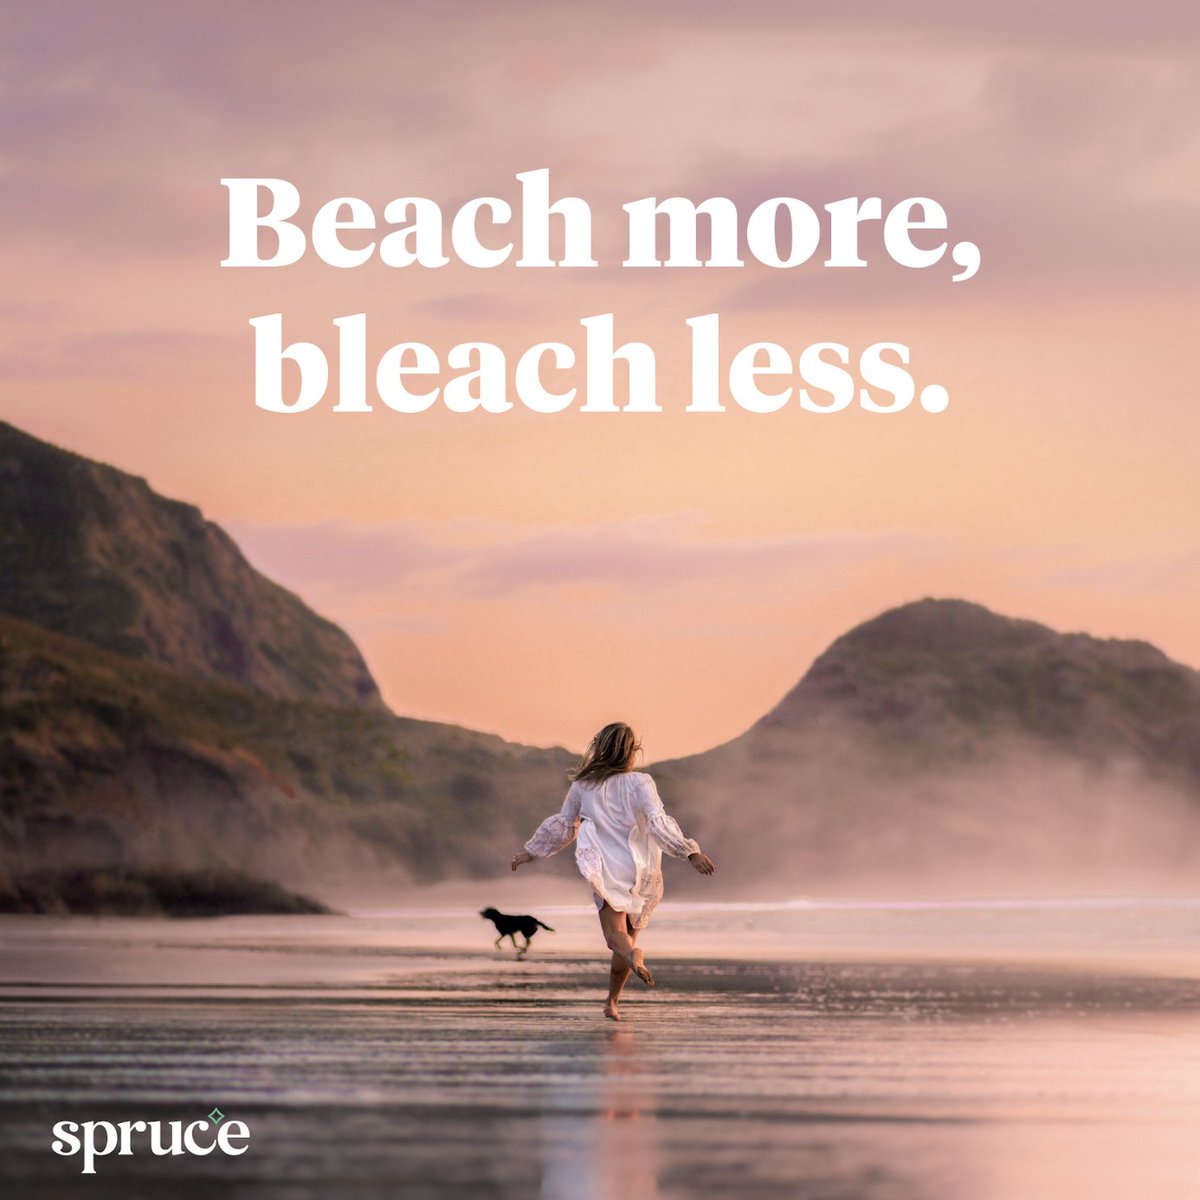 Summer dreams are made of sandy beaches, not dirty floors! Spruce gives you the freedom to chase sunsets, not dust bunnies. 🌅 #SpruceYourSummer

#ChoreLess #GetSpruce #apartmentliving #apartmentclean